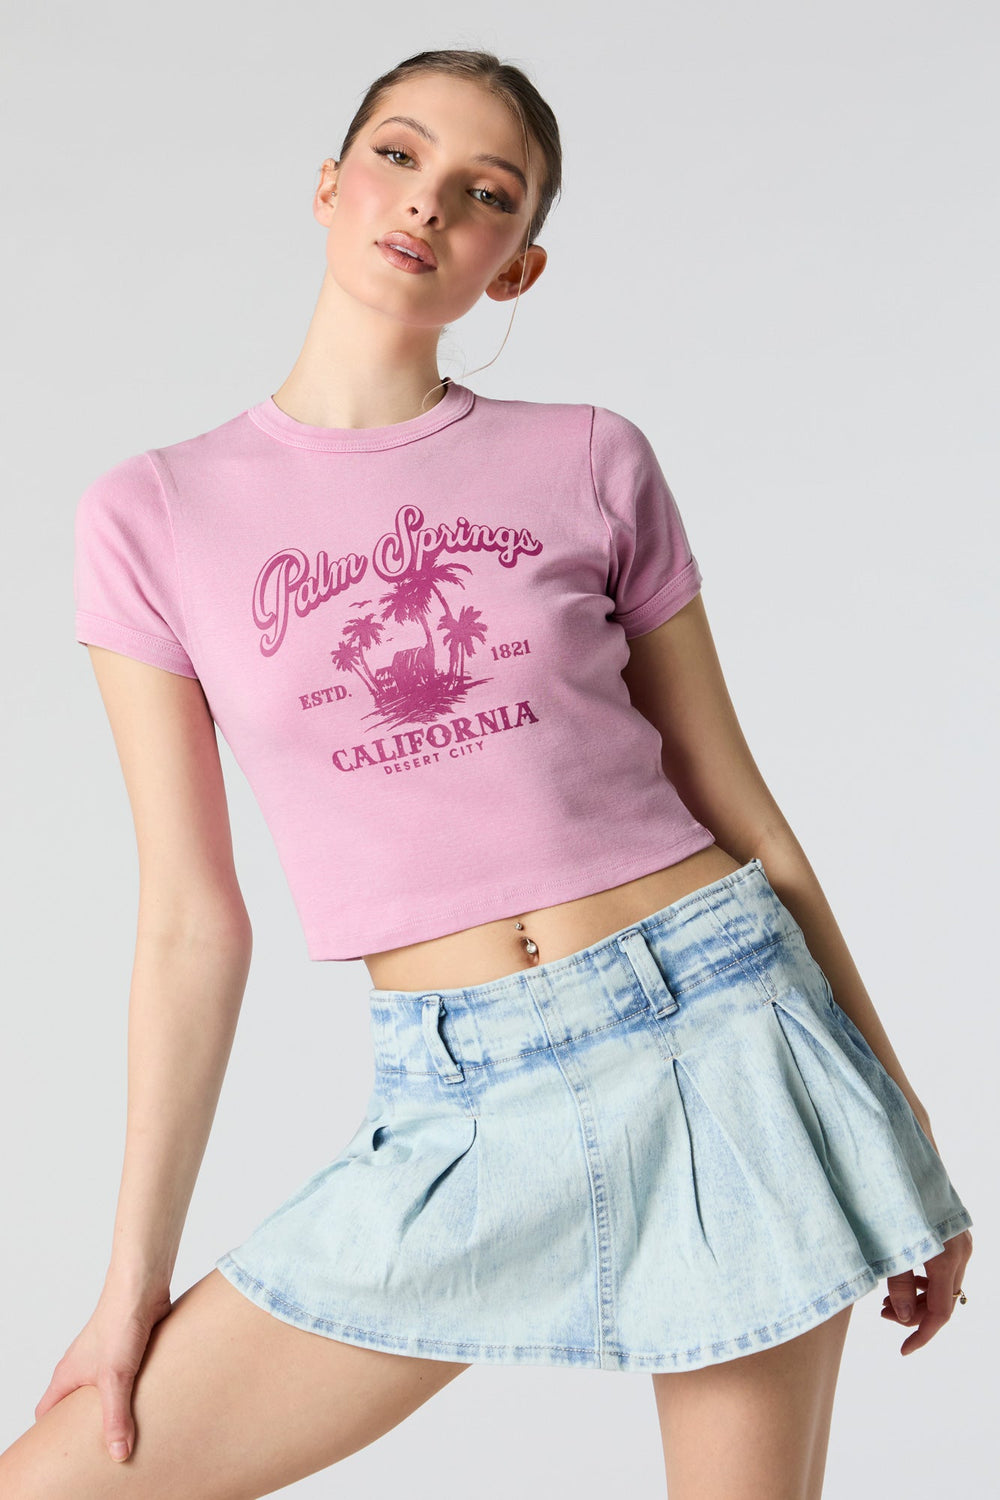 Palm Springs Graphic Baby T-Shirt Palm Springs Graphic Baby T-Shirt 2